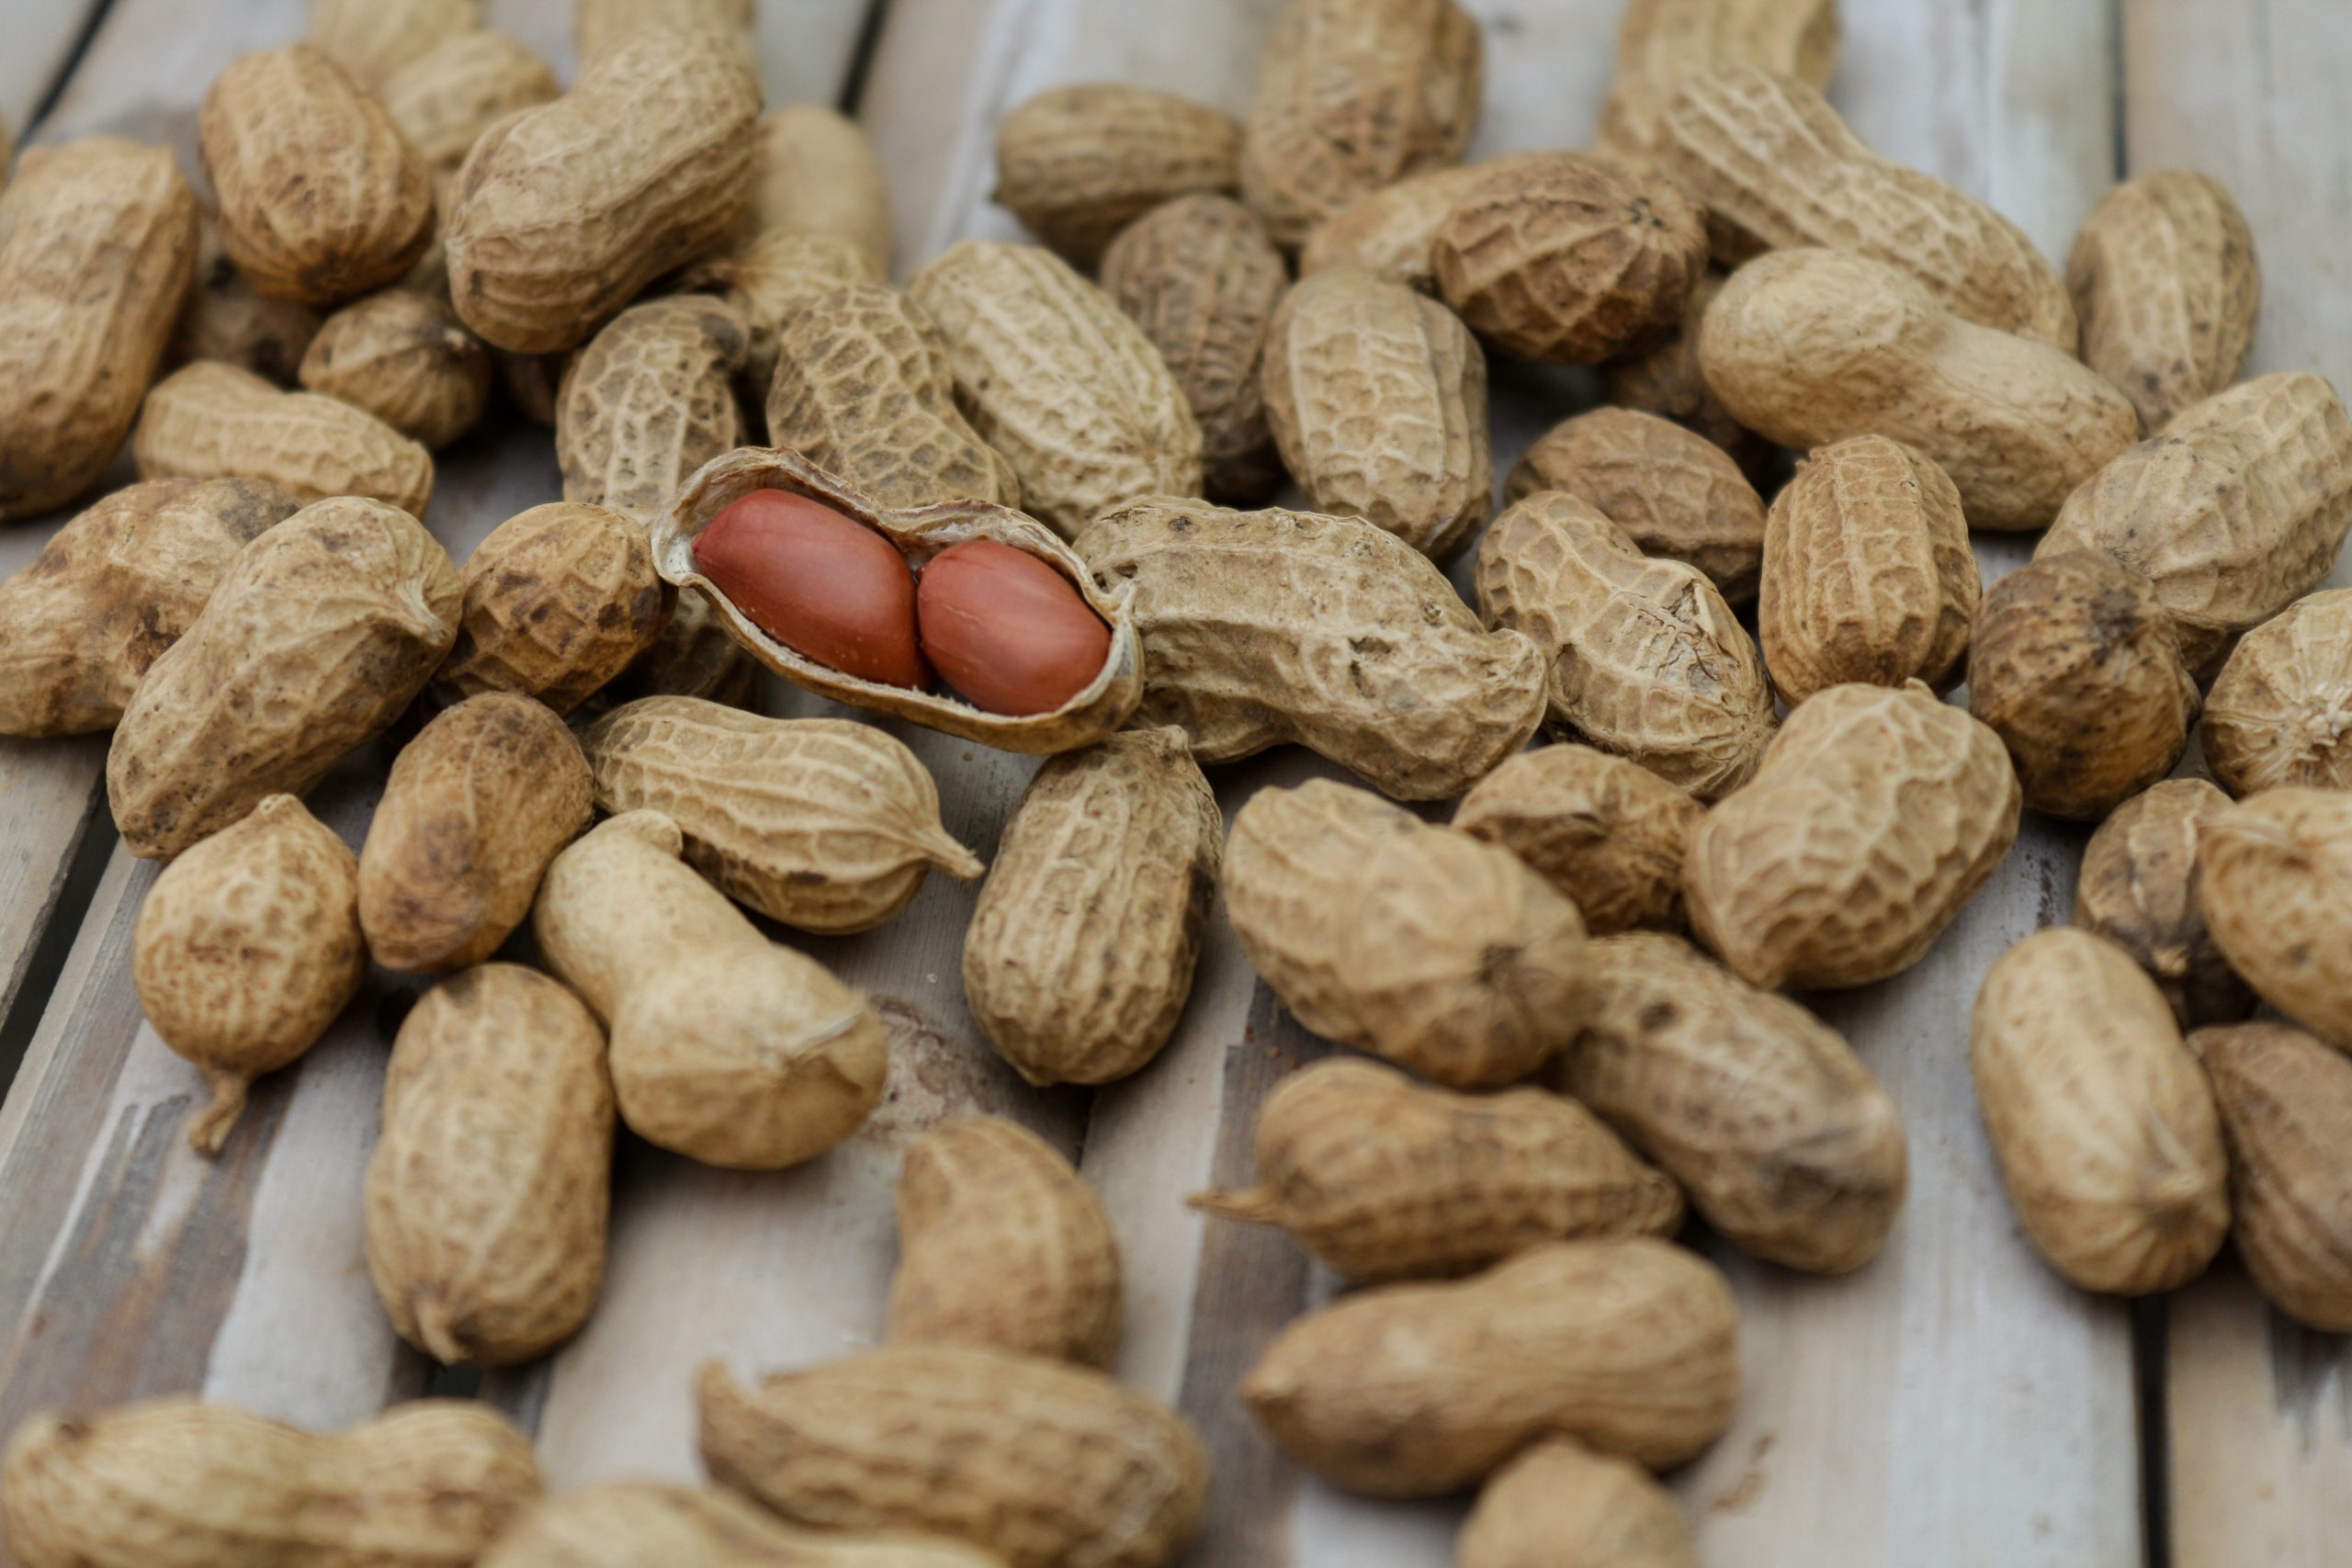 A (Sort of) Yankee Girl's Guide to Boiled Peanuts